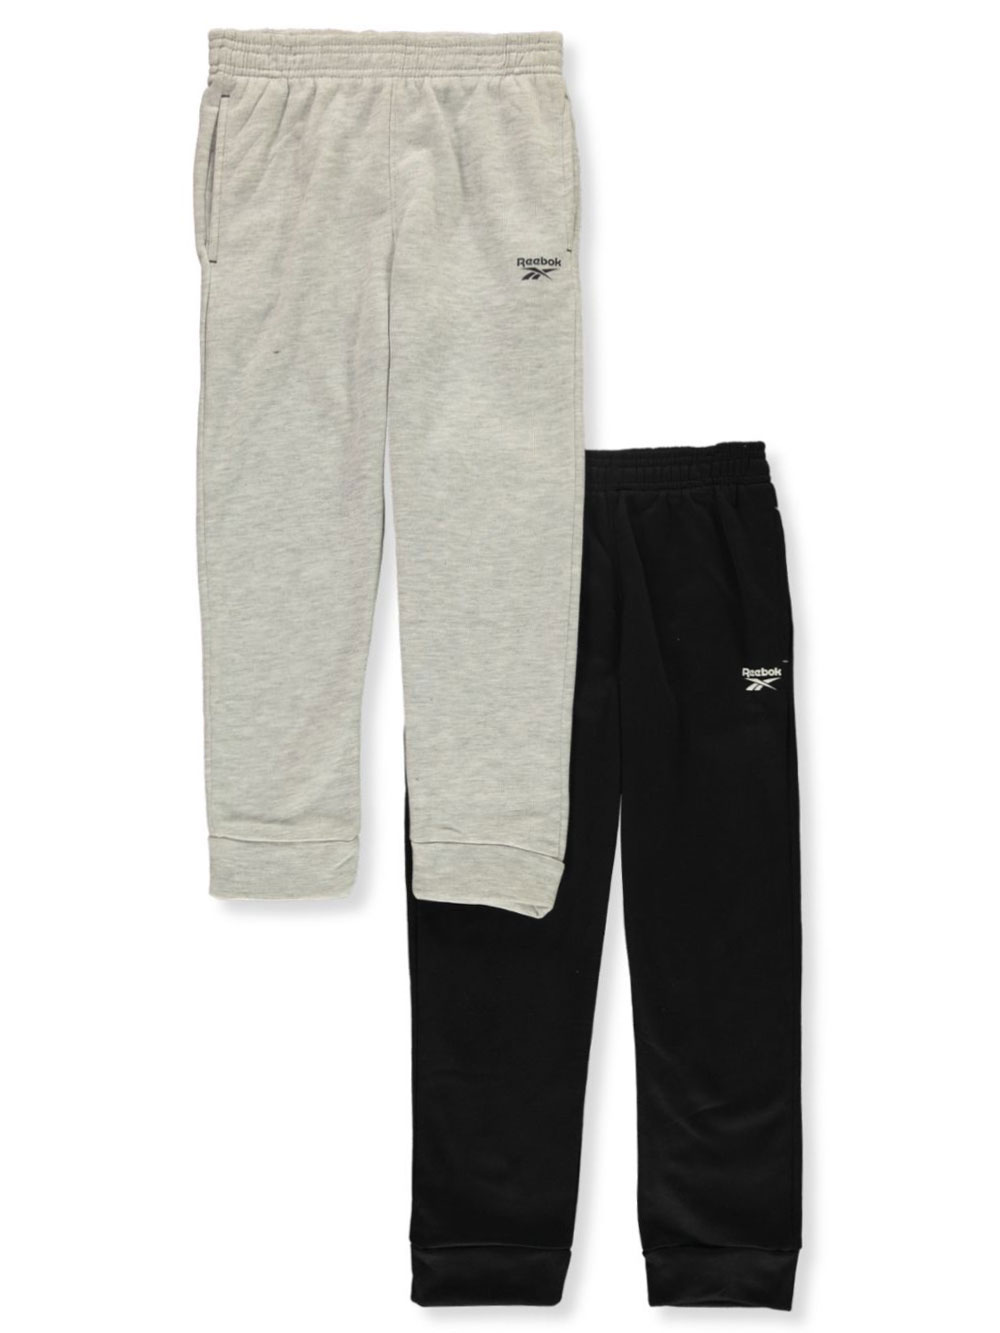 Boys Black and Red Sweatpants